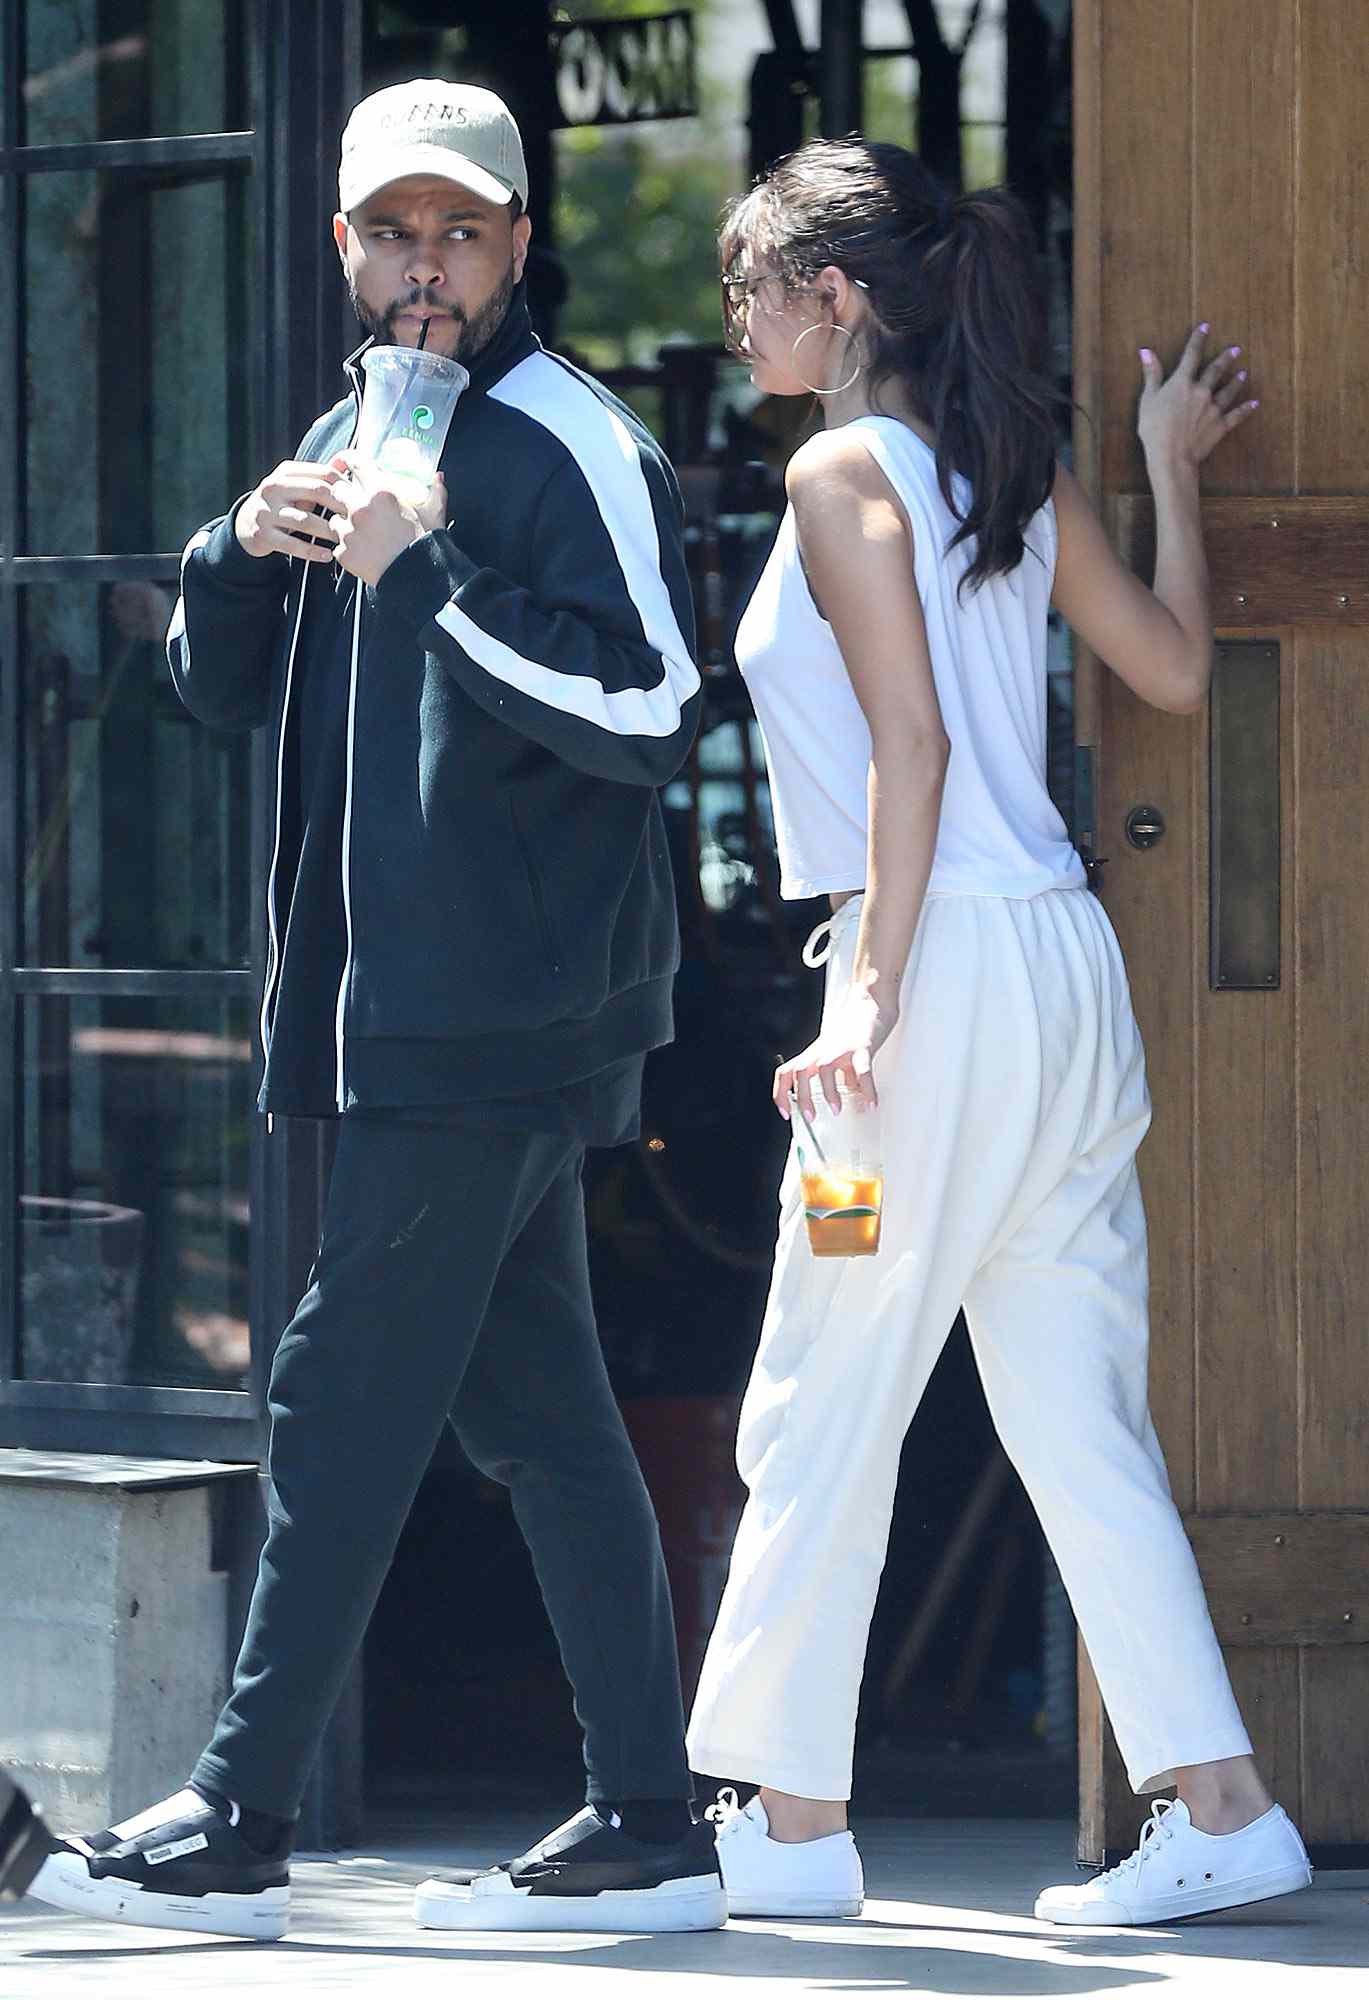 Selena Gomez and boyfriend The Weeknd celebrity Selena's birthday 25th with a lunch date in Los Angeles